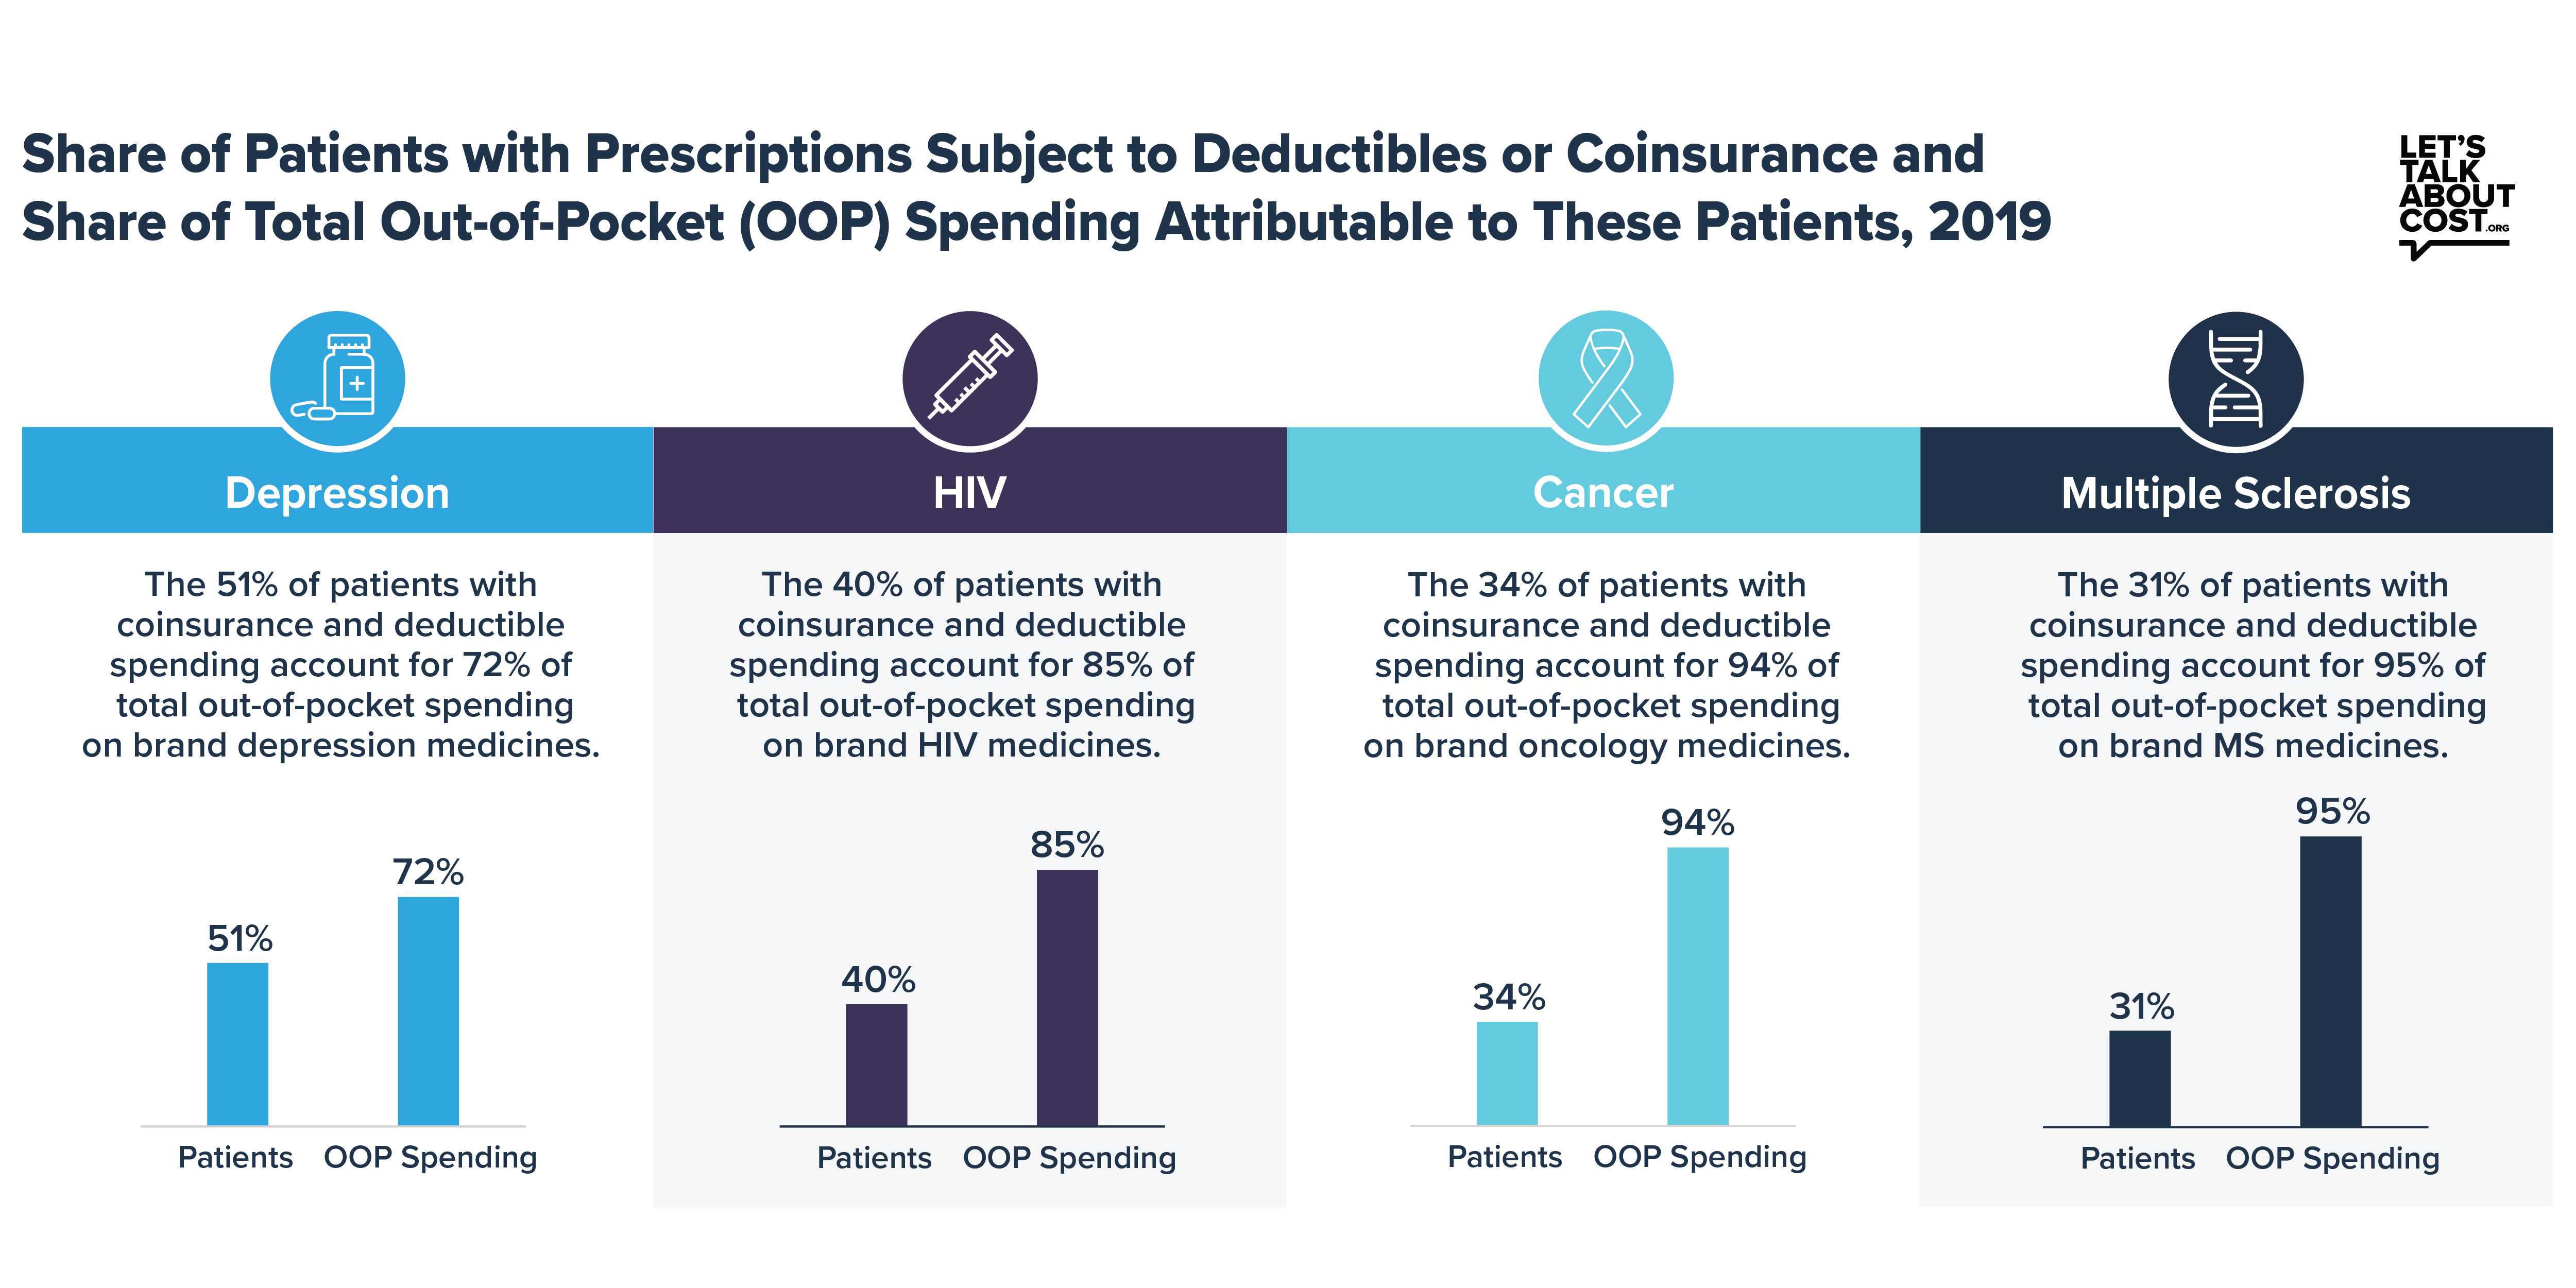 Share of patients with prescriptions subject to deductibles or coinsurance share of total outofpocket spend atrributable to these patients 2019 